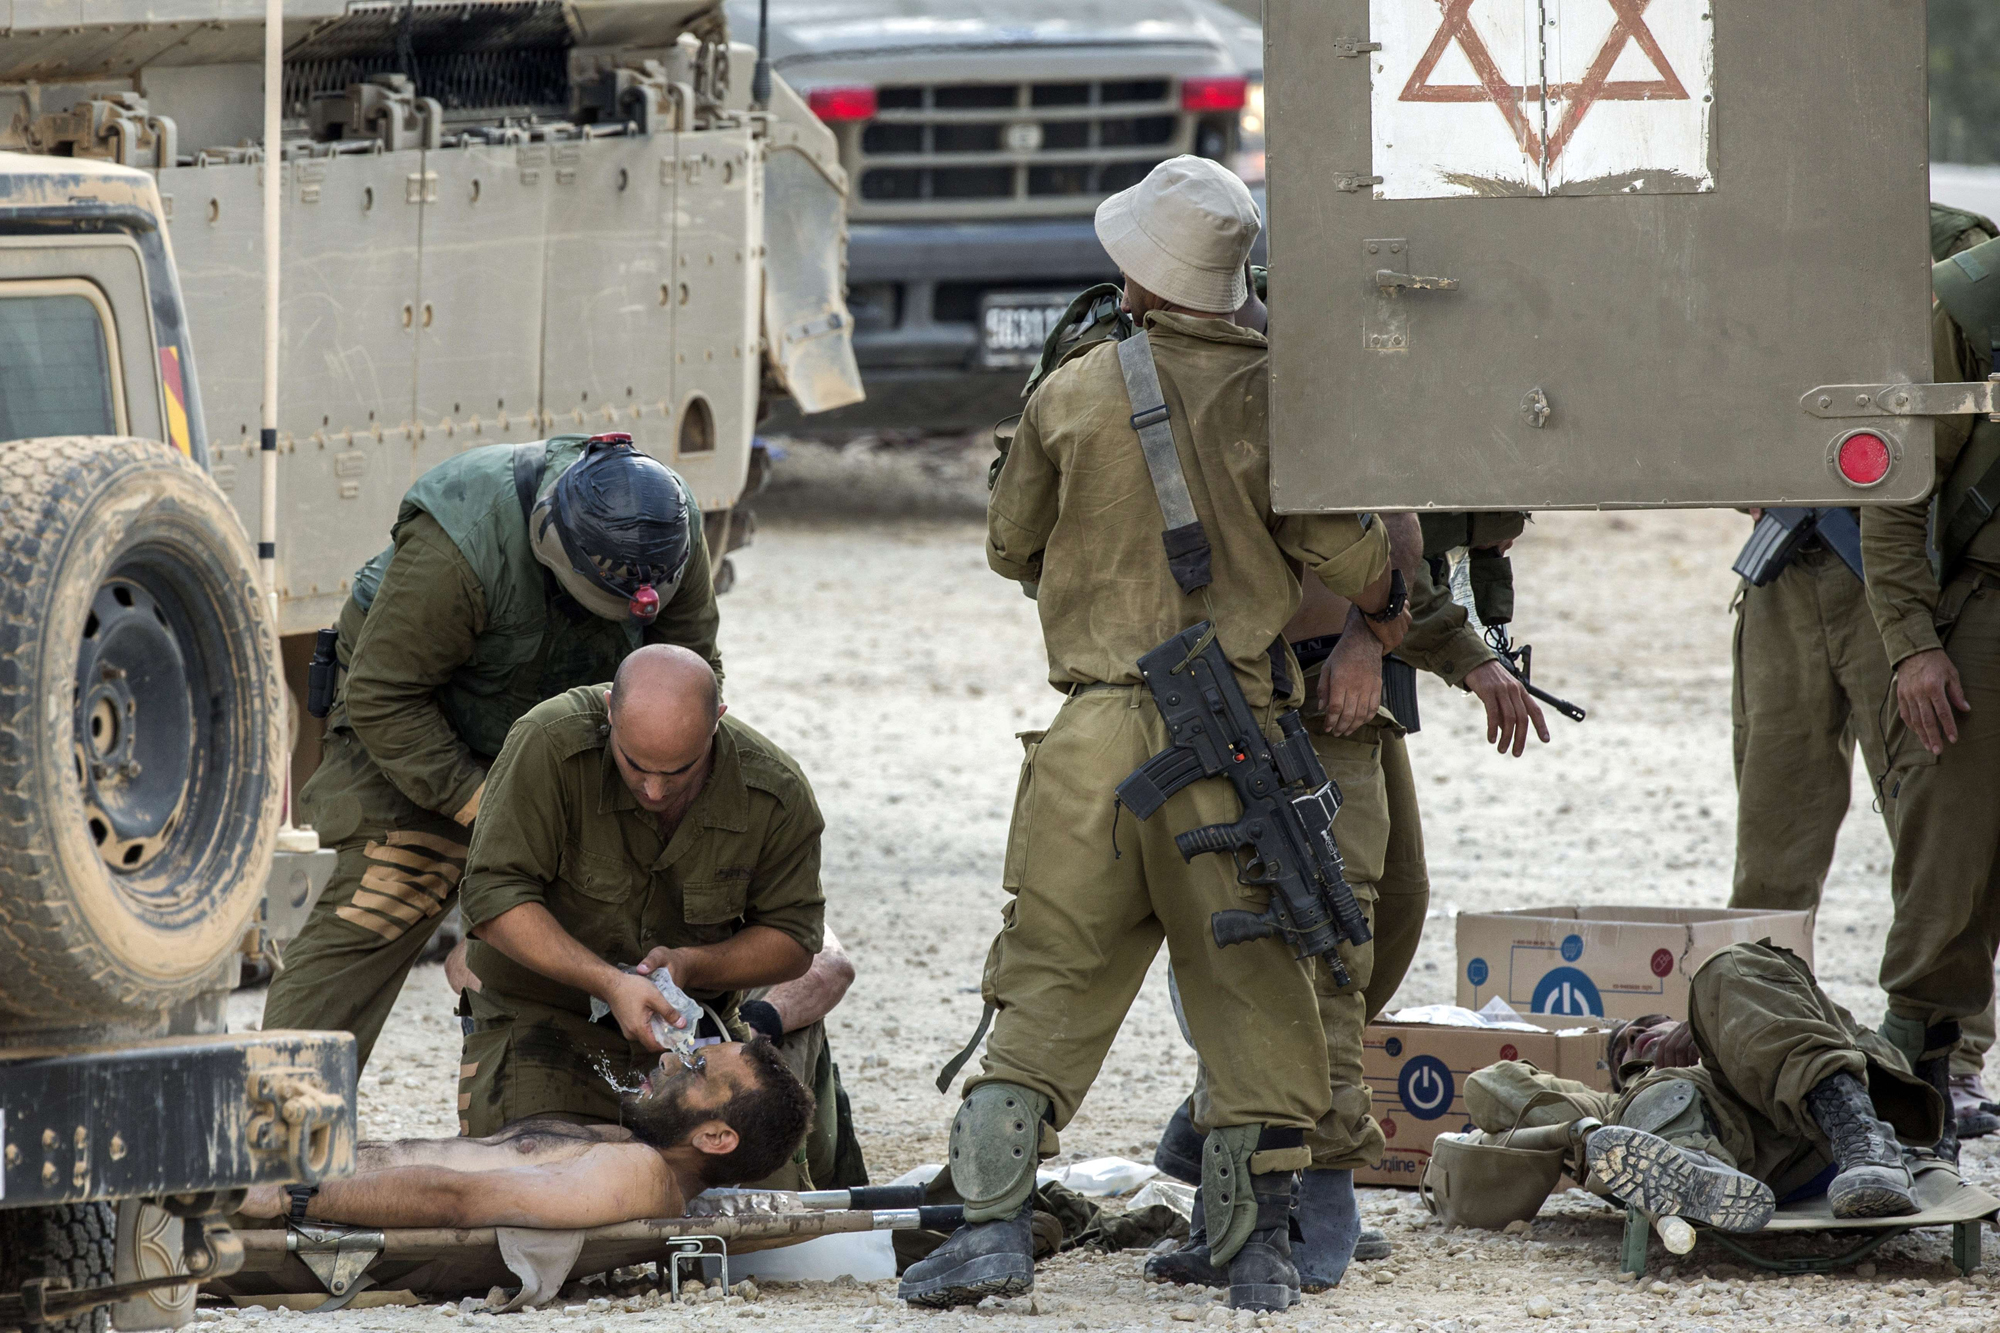 Israeli soldiers evacuate their wounded comrades at an army deployment area near Israel's border with the Gaza Strip, on July 20, 2014.